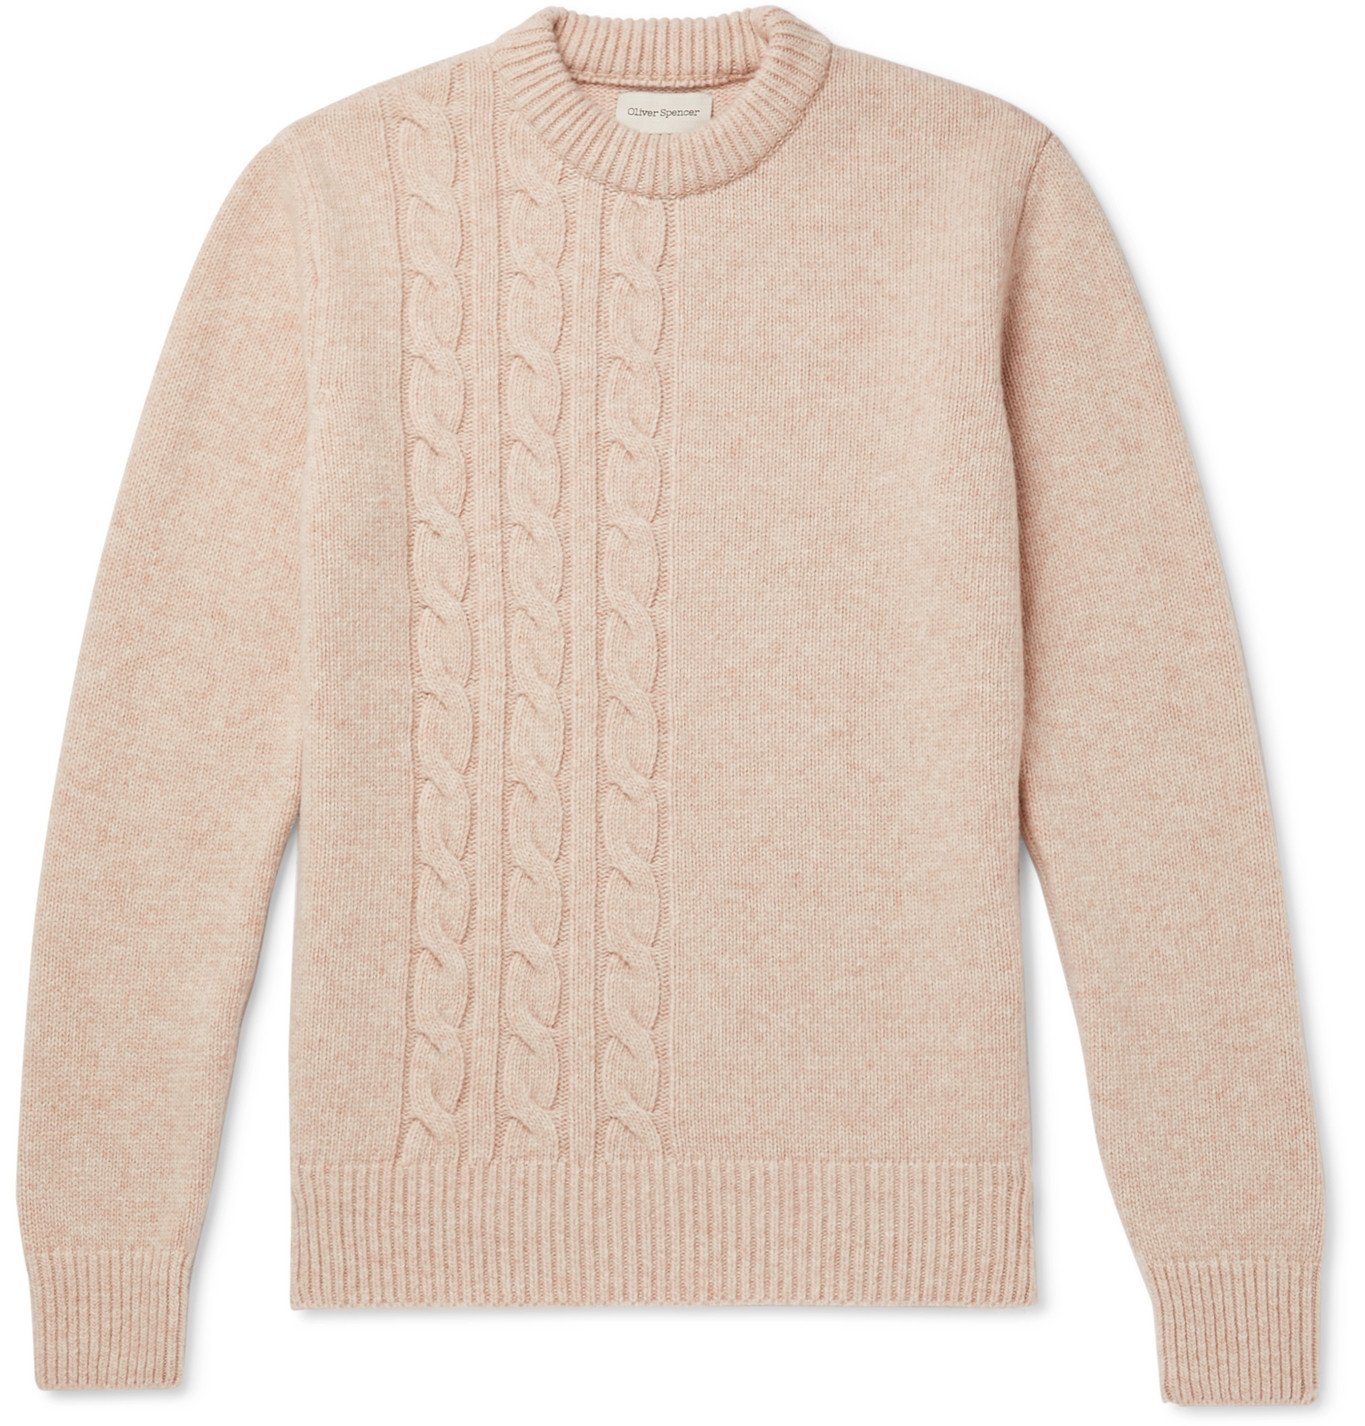 Oliver Spencer - Blenheim Cable-Knit Wool Sweater - Neutrals